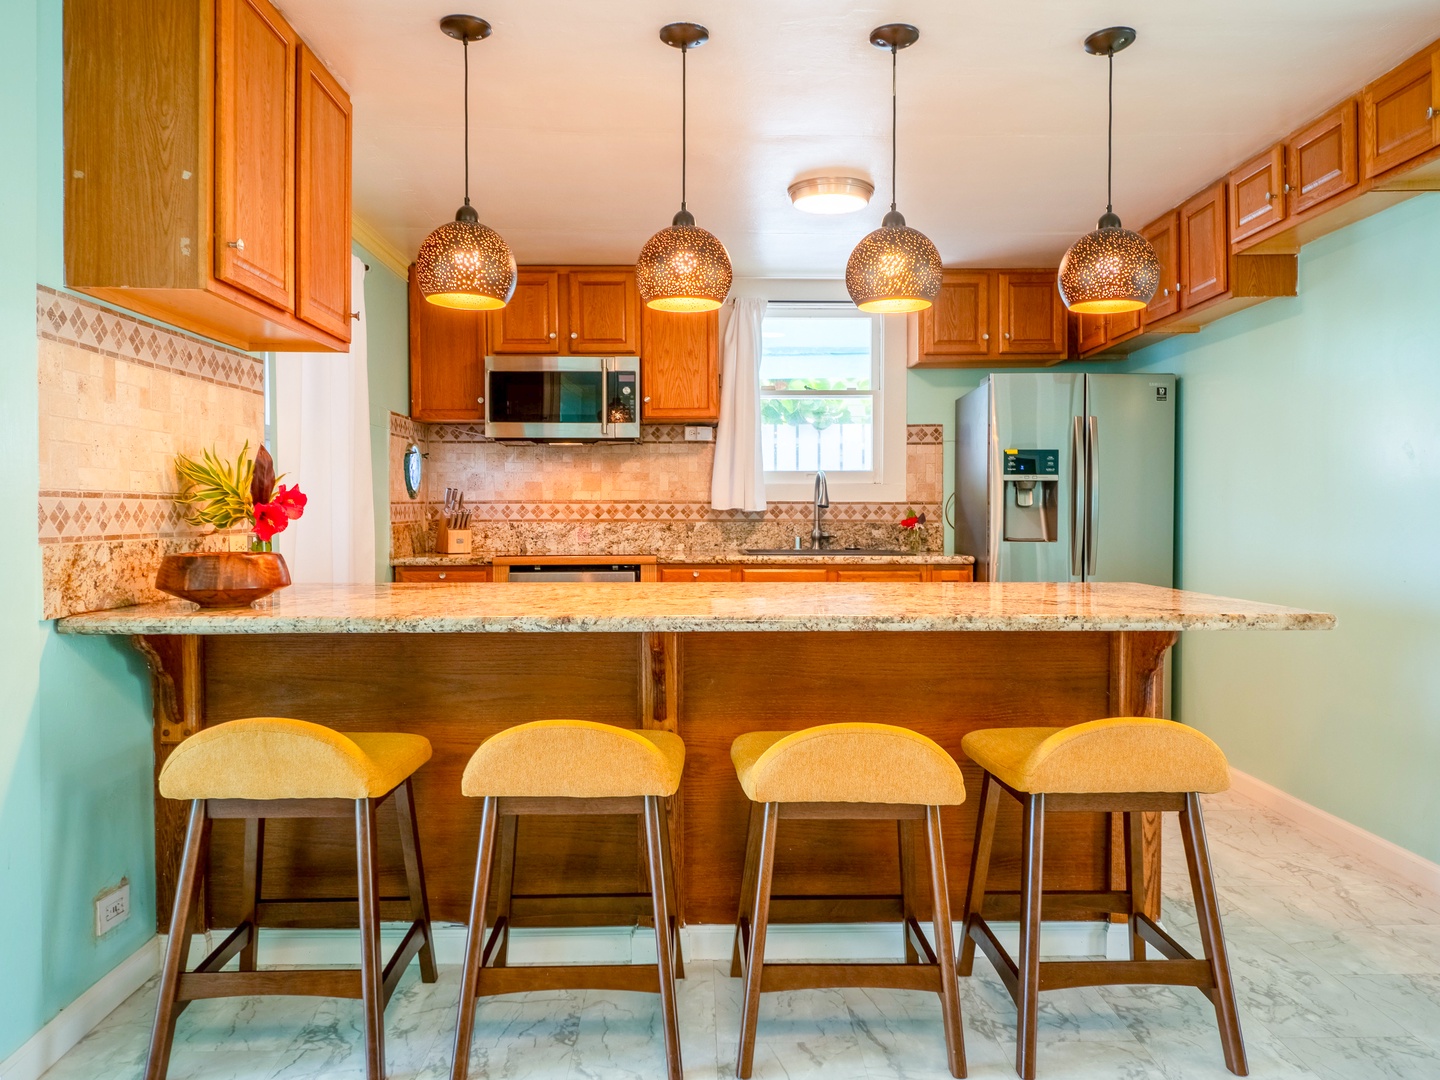 Hauula Vacation Rentals, Paradise Reef Retreat - Chic kitchen bar/island, the perfect spot for sharing quick bites and laughter, all while enjoying top-notch entertainment.